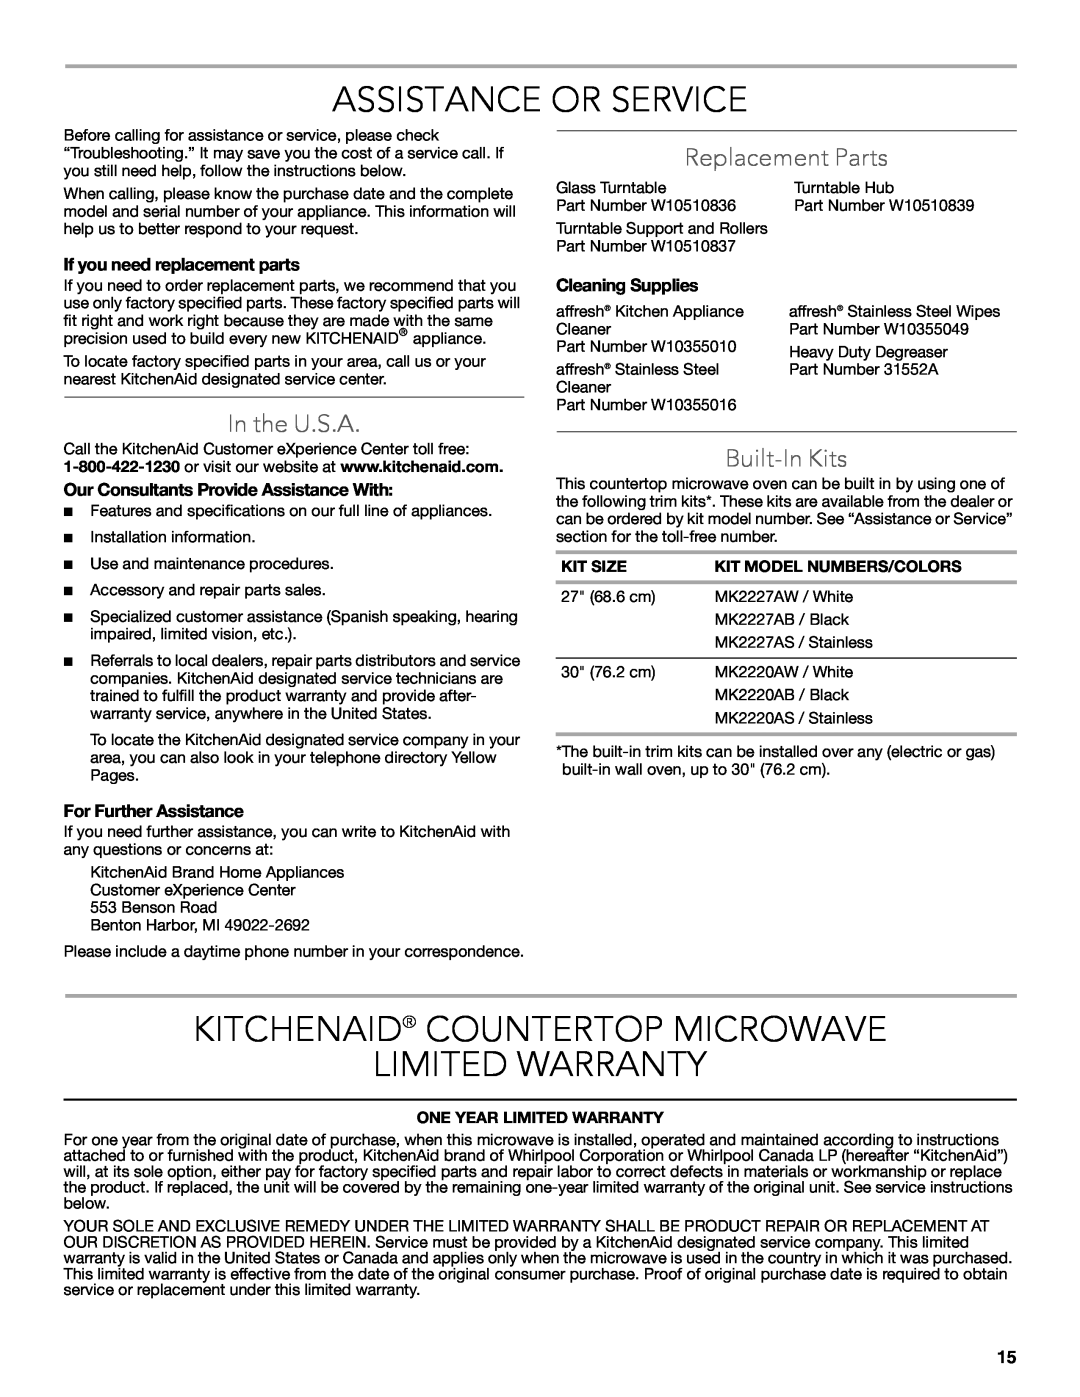 KitchenAid KCMS2255 Assistance Or Service, Kitchenaid Countertop Microwave Limited Warranty, In the U.S.A, Built-In Kits 